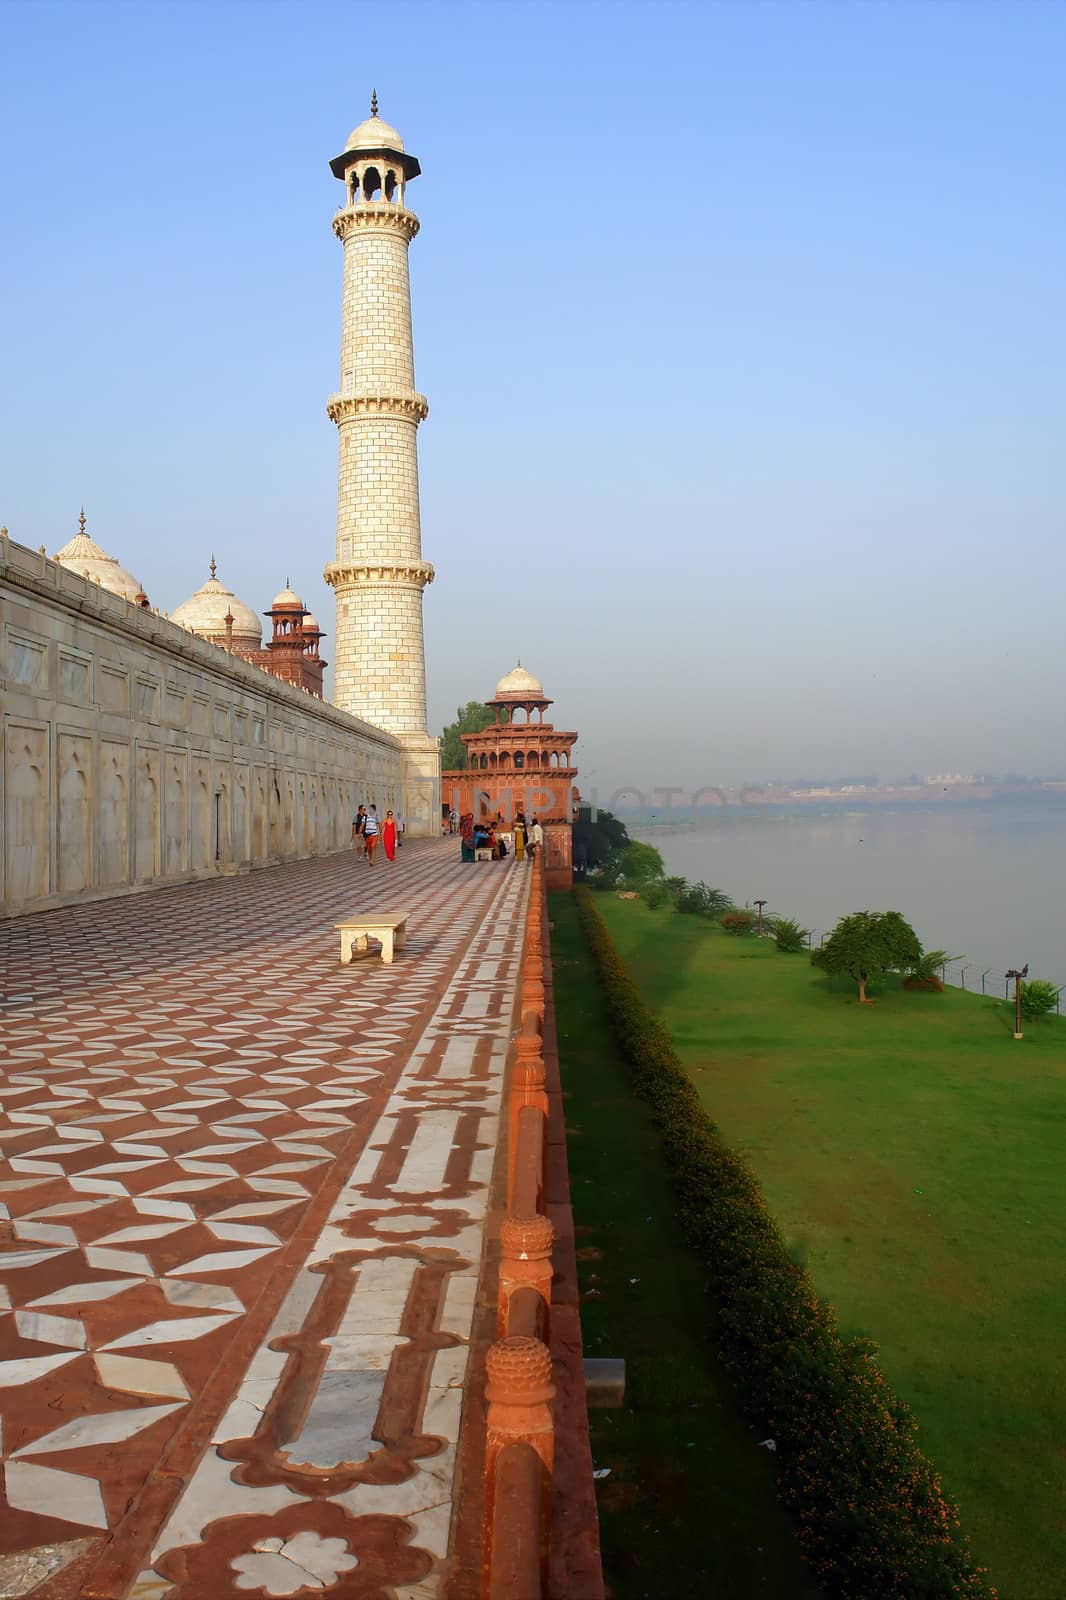 Overview of the Taj Mahal and garden by ptxgarfield